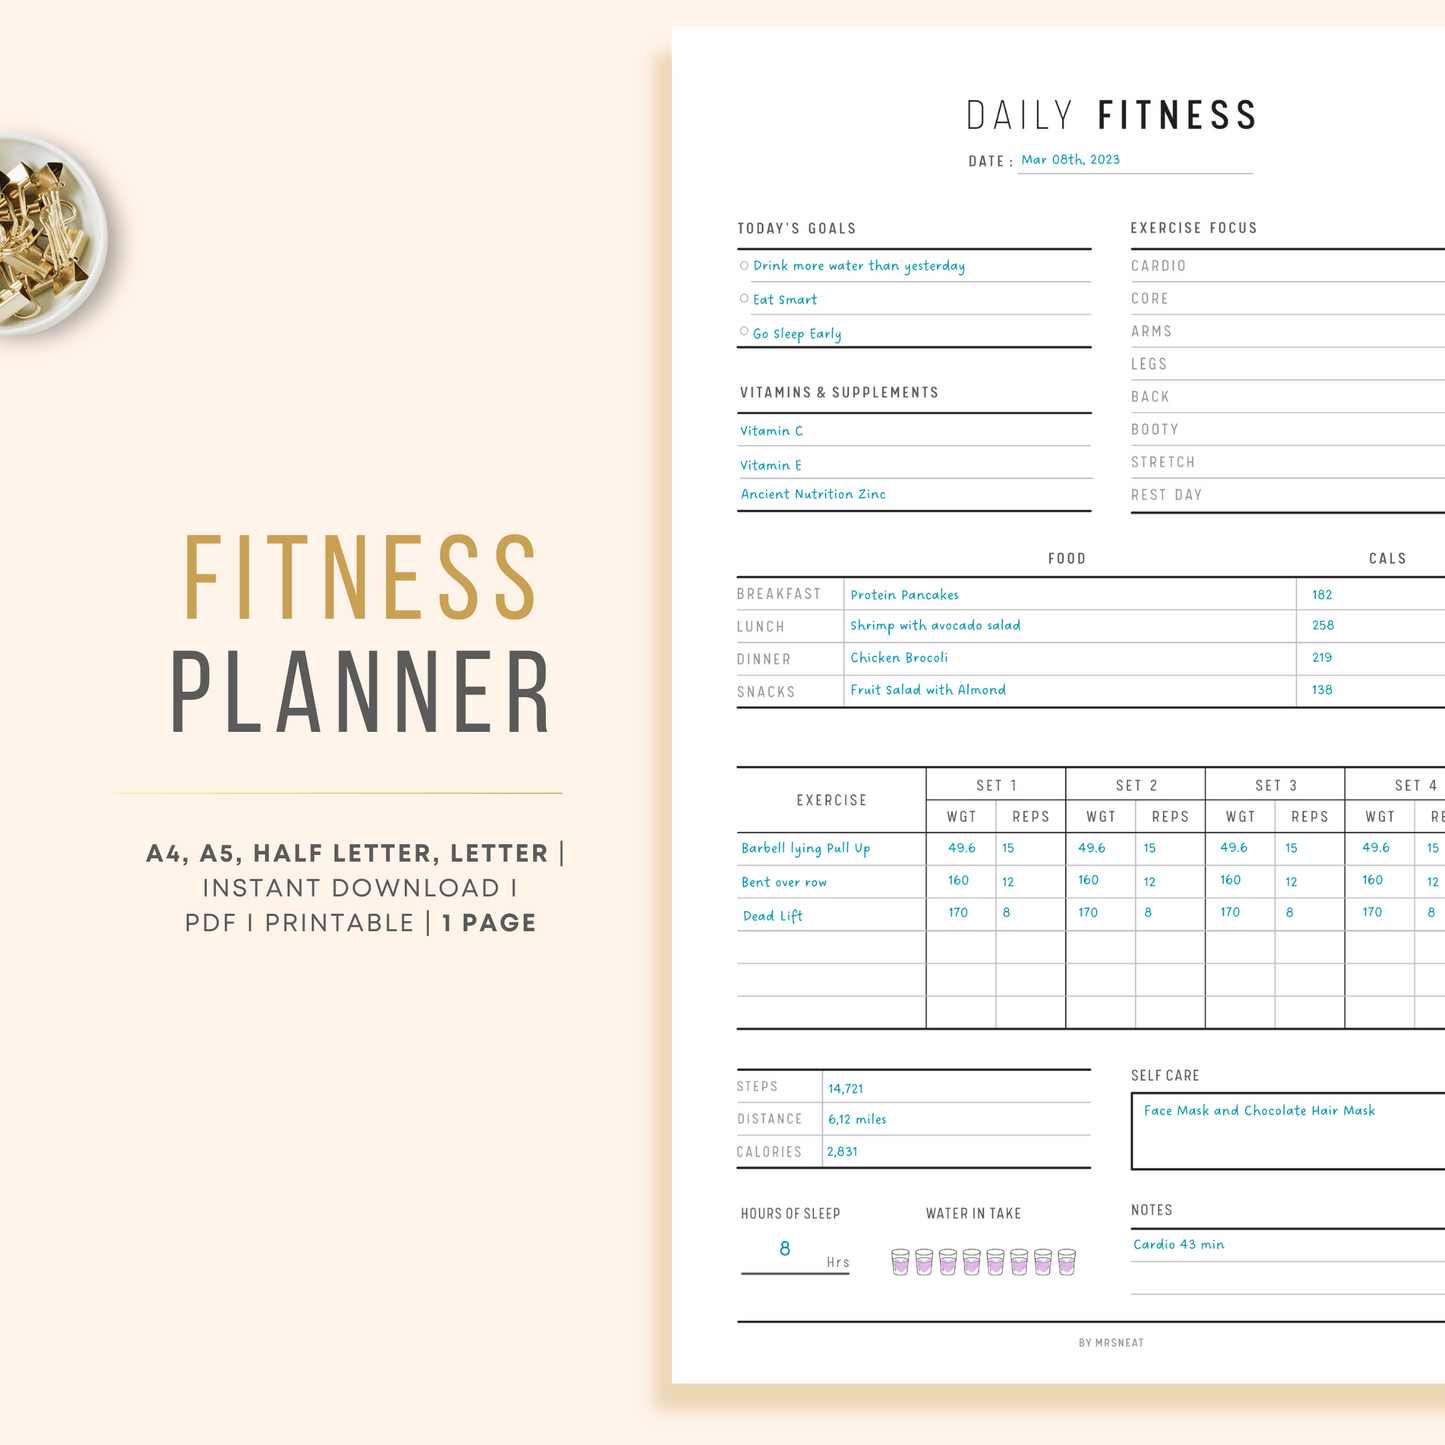 Clean and Minimalist Daily Fitness Planner